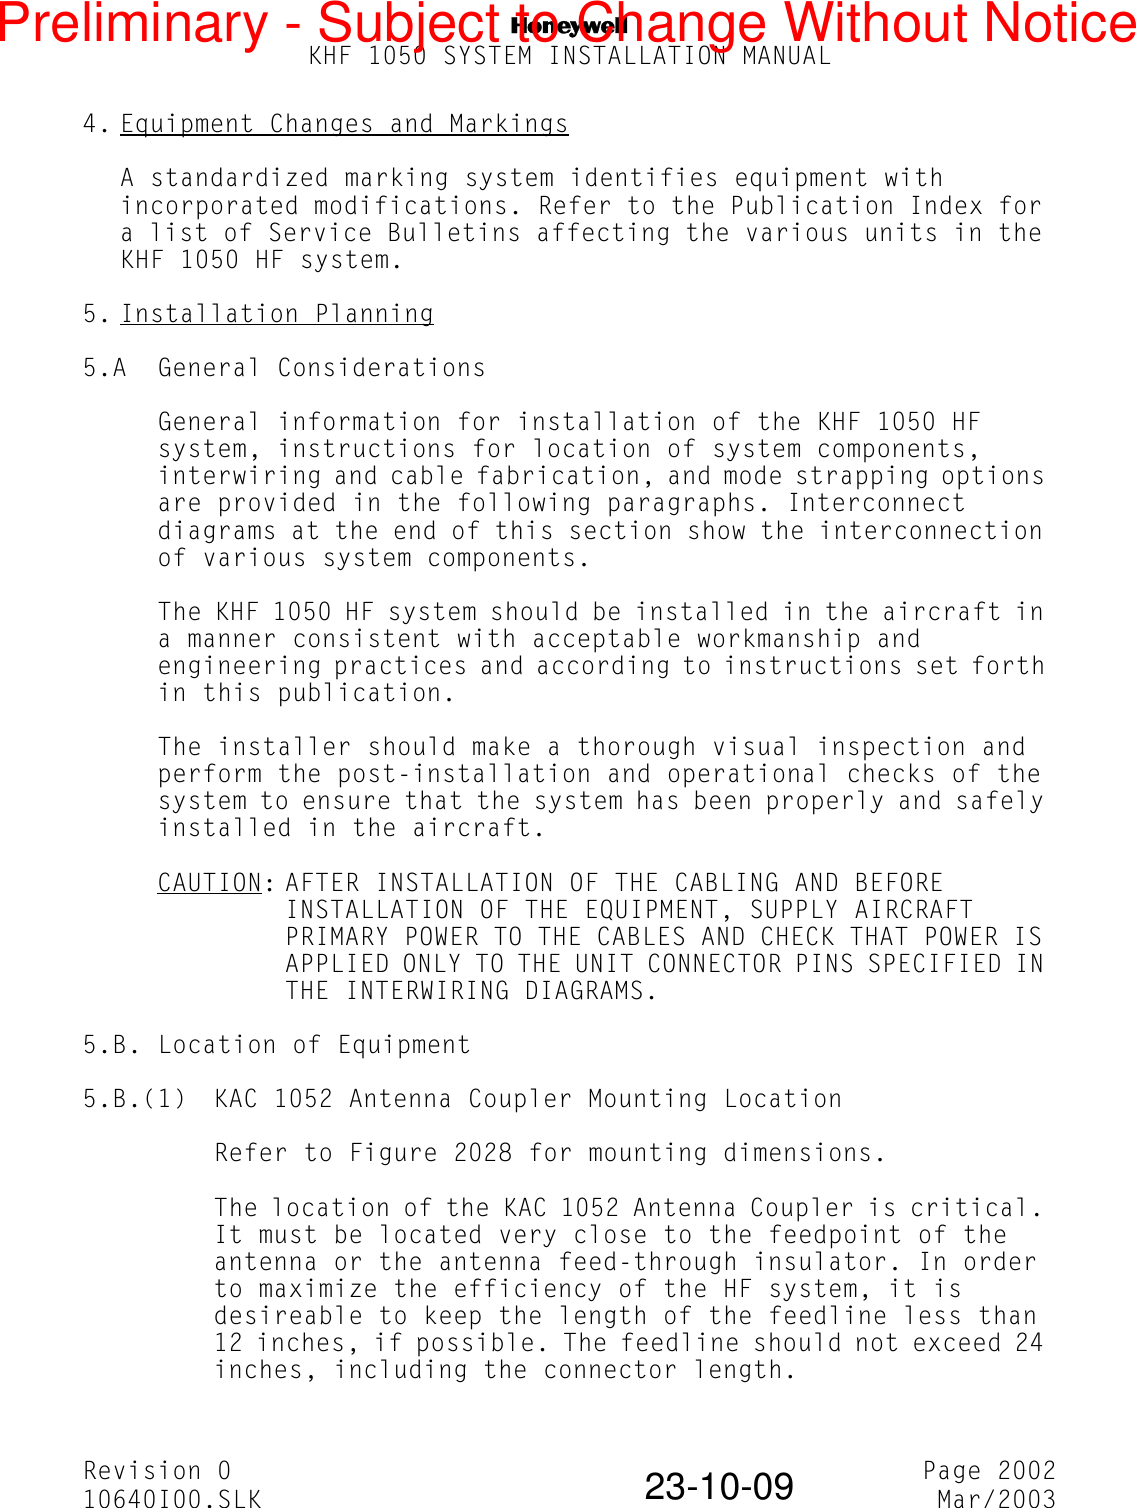 NKHF 1050 SYSTEM INSTALLATION MANUALRevision 0 Page 200210640I00.SLK Mar/200323-10-094. Equipment Changes and MarkingsA standardized marking system identifies equipment with incorporated modifications. Refer to the Publication Index for a list of Service Bulletins affecting the various units in the KHF 1050 HF system.5. Installation Planning5.A General ConsiderationsGeneral information for installation of the KHF 1050 HF system, instructions for location of system components, interwiring and cable fabrication, and mode strapping options are provided in the following paragraphs. Interconnect diagrams at the end of this section show the interconnection of various system components.The KHF 1050 HF system should be installed in the aircraft in a manner consistent with acceptable workmanship and engineering practices and according to instructions set forth in this publication.The installer should make a thorough visual inspection and perform the post-installation and operational checks of the system to ensure that the system has been properly and safely installed in the aircraft.CAUTION: AFTER INSTALLATION OF THE CABLING AND BEFORE INSTALLATION OF THE EQUIPMENT, SUPPLY AIRCRAFT PRIMARY POWER TO THE CABLES AND CHECK THAT POWER IS APPLIED ONLY TO THE UNIT CONNECTOR PINS SPECIFIED IN THE INTERWIRING DIAGRAMS.5.B. Location of Equipment5.B.(1) KAC 1052 Antenna Coupler Mounting LocationRefer to Figure 2028 for mounting dimensions.The location of the KAC 1052 Antenna Coupler is critical. It must be located very close to the feedpoint of the antenna or the antenna feed-through insulator. In order to maximize the efficiency of the HF system, it is desireable to keep the length of the feedline less than 12 inches, if possible. The feedline should not exceed 24 inches, including the connector length.Preliminary - Subject to Change Without Notice